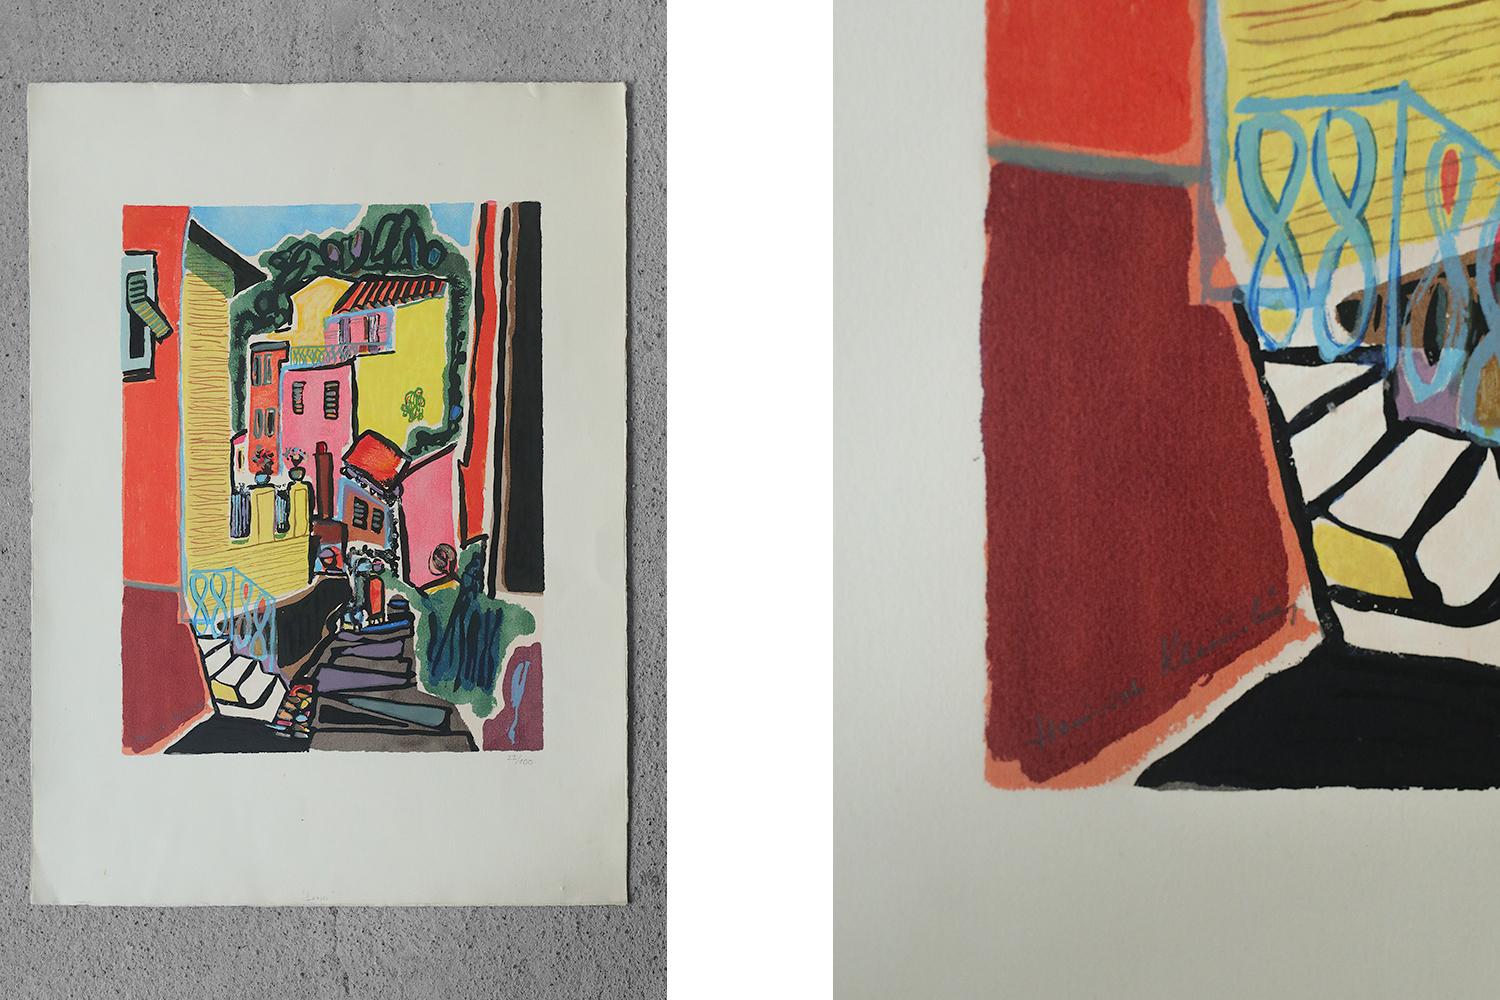 Author unknown, Lerici
Color lithograph
Number 22/100
The work signed by the artist's signature, individual number and title
Work dimensions 70/51
Unframed work

Work in original vintage condition. It has a signature of the artist. Unfortunately, it